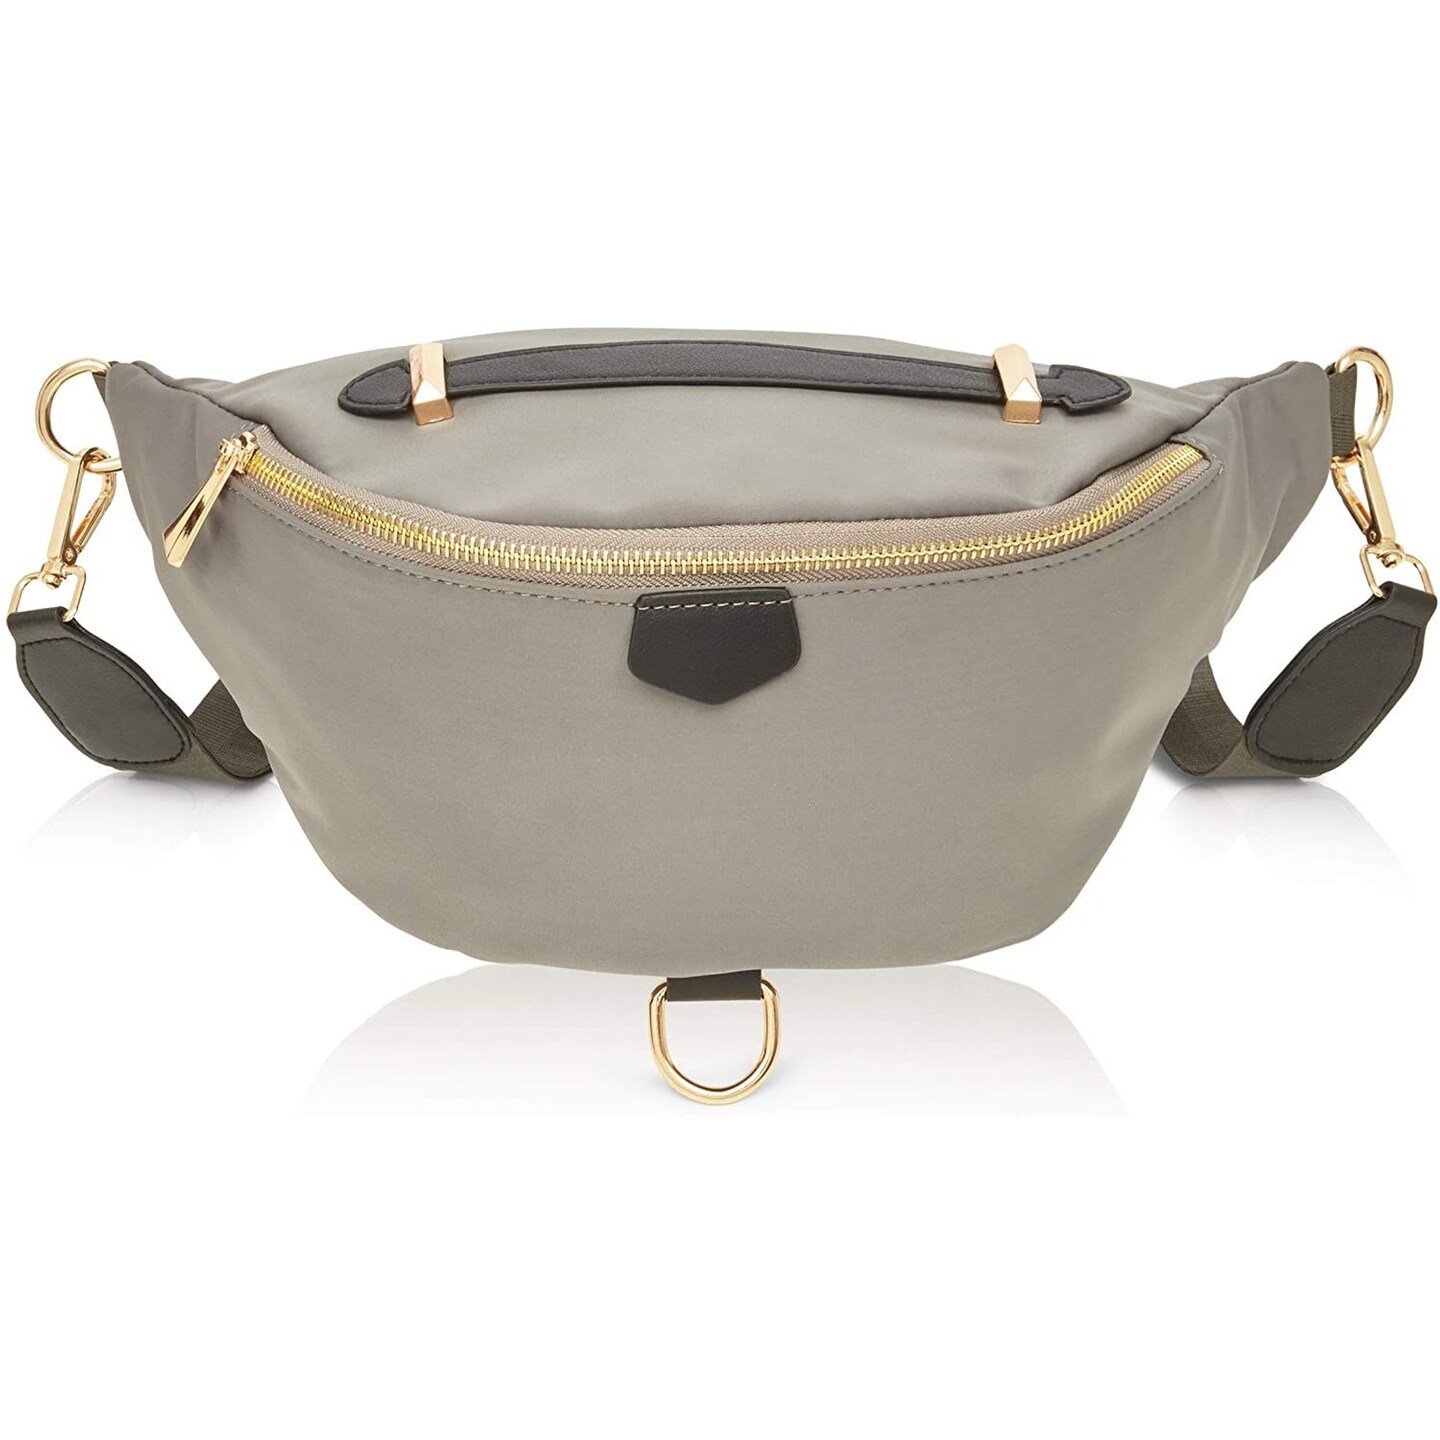 Zodaca Black Plus Size Fanny Pack for Women and Men, Fashion